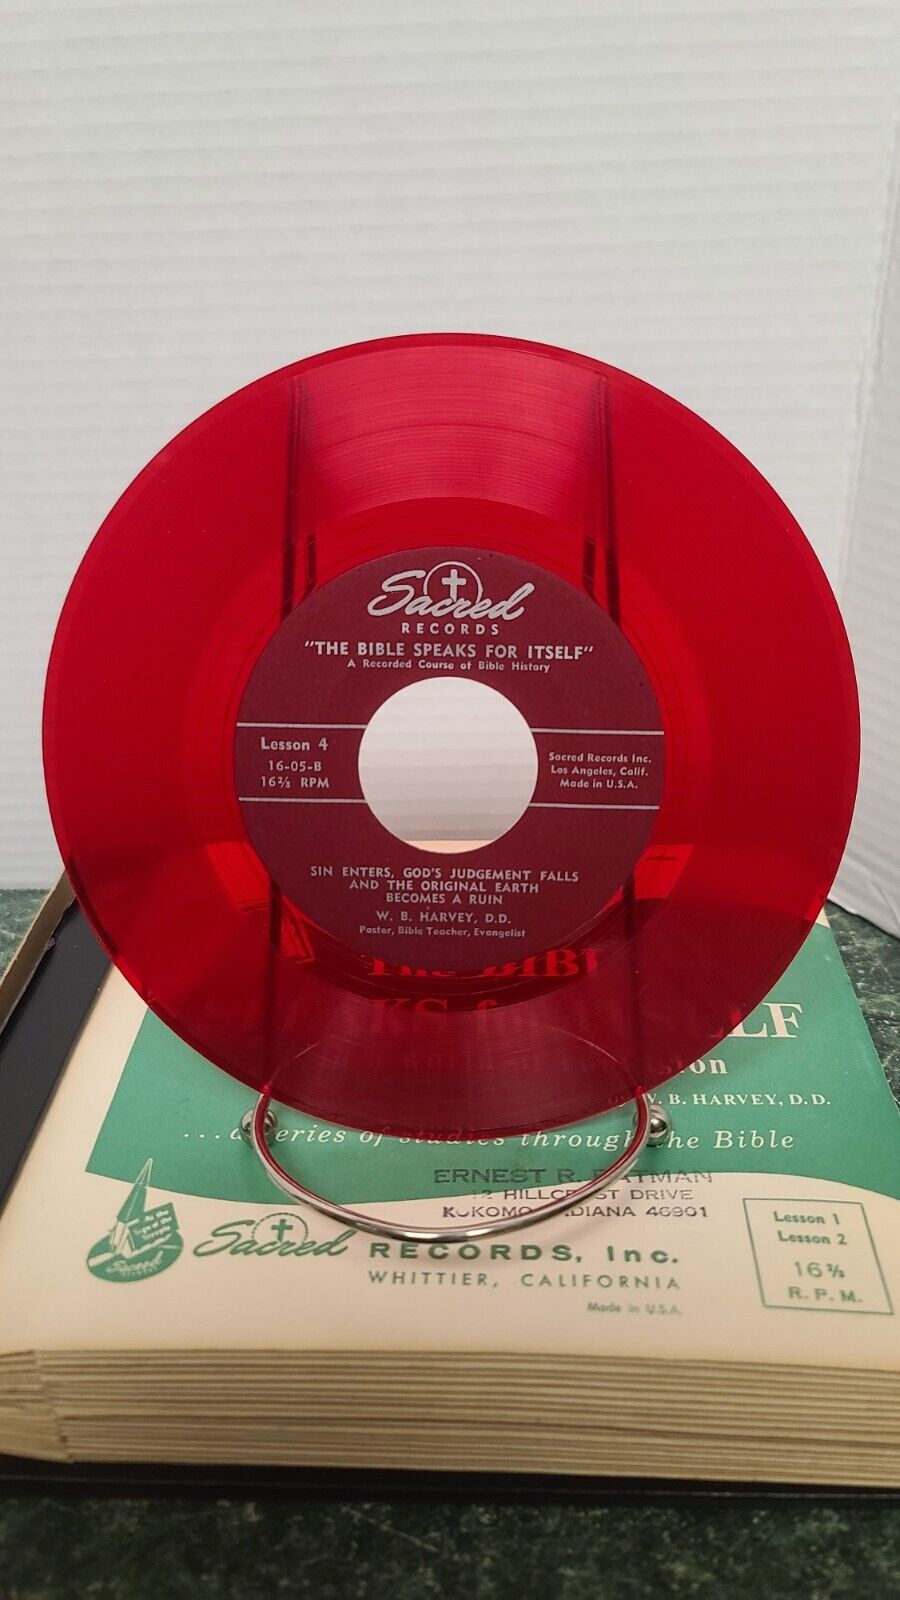 Library Of Sacred The Bible Speaks For Itself 20 Red 45s Vinyl Records Binder